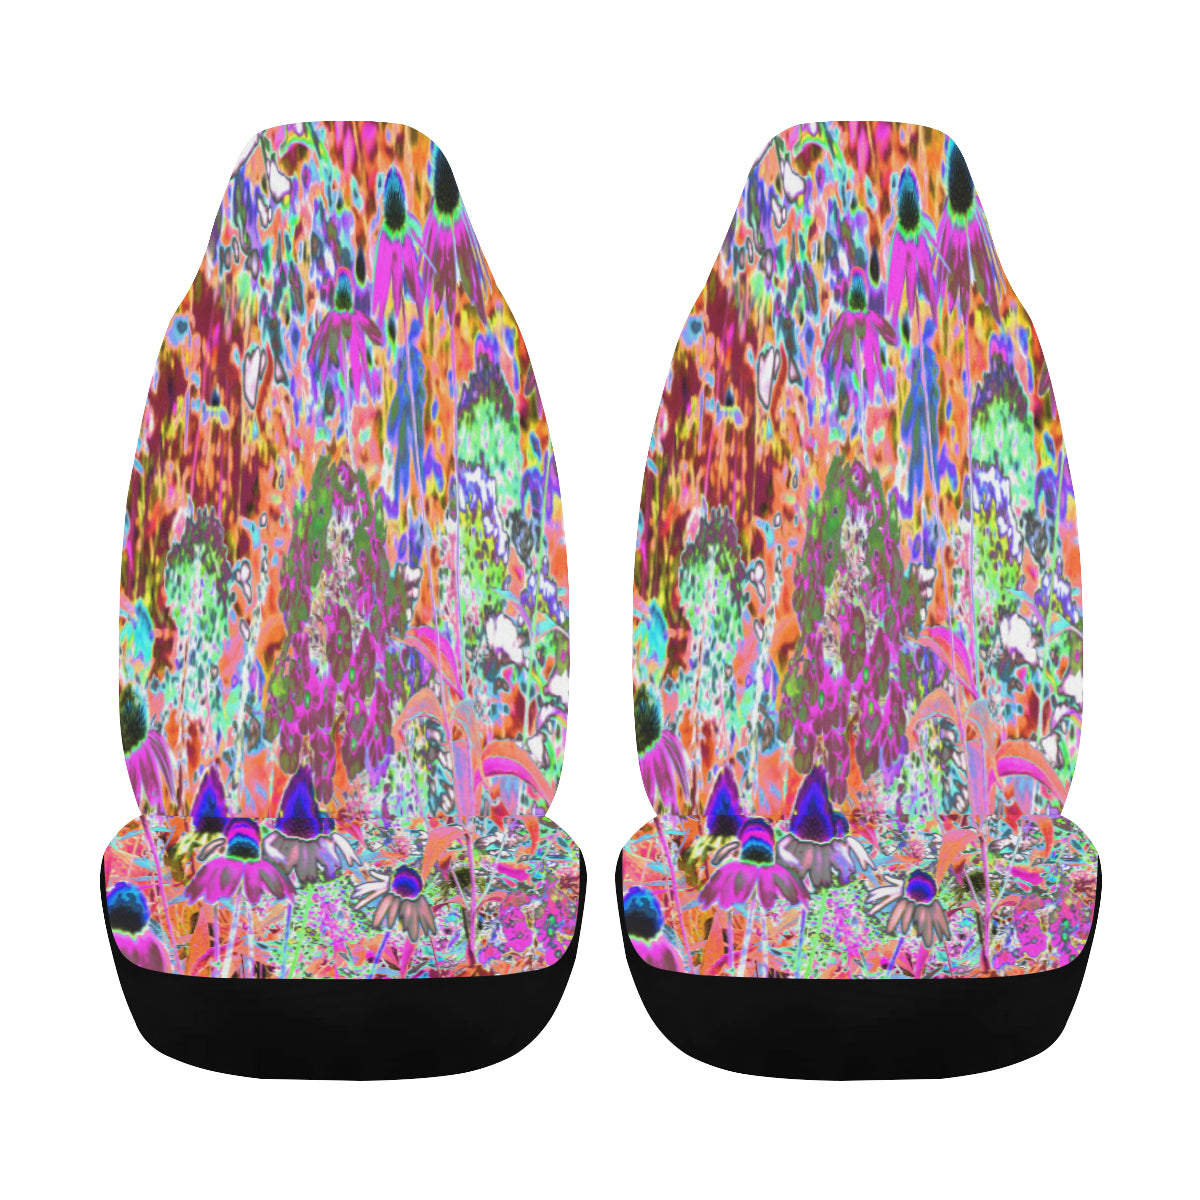 Car Seat Covers, Psychedelic Hot Pink and Lime Green Garden Flowers